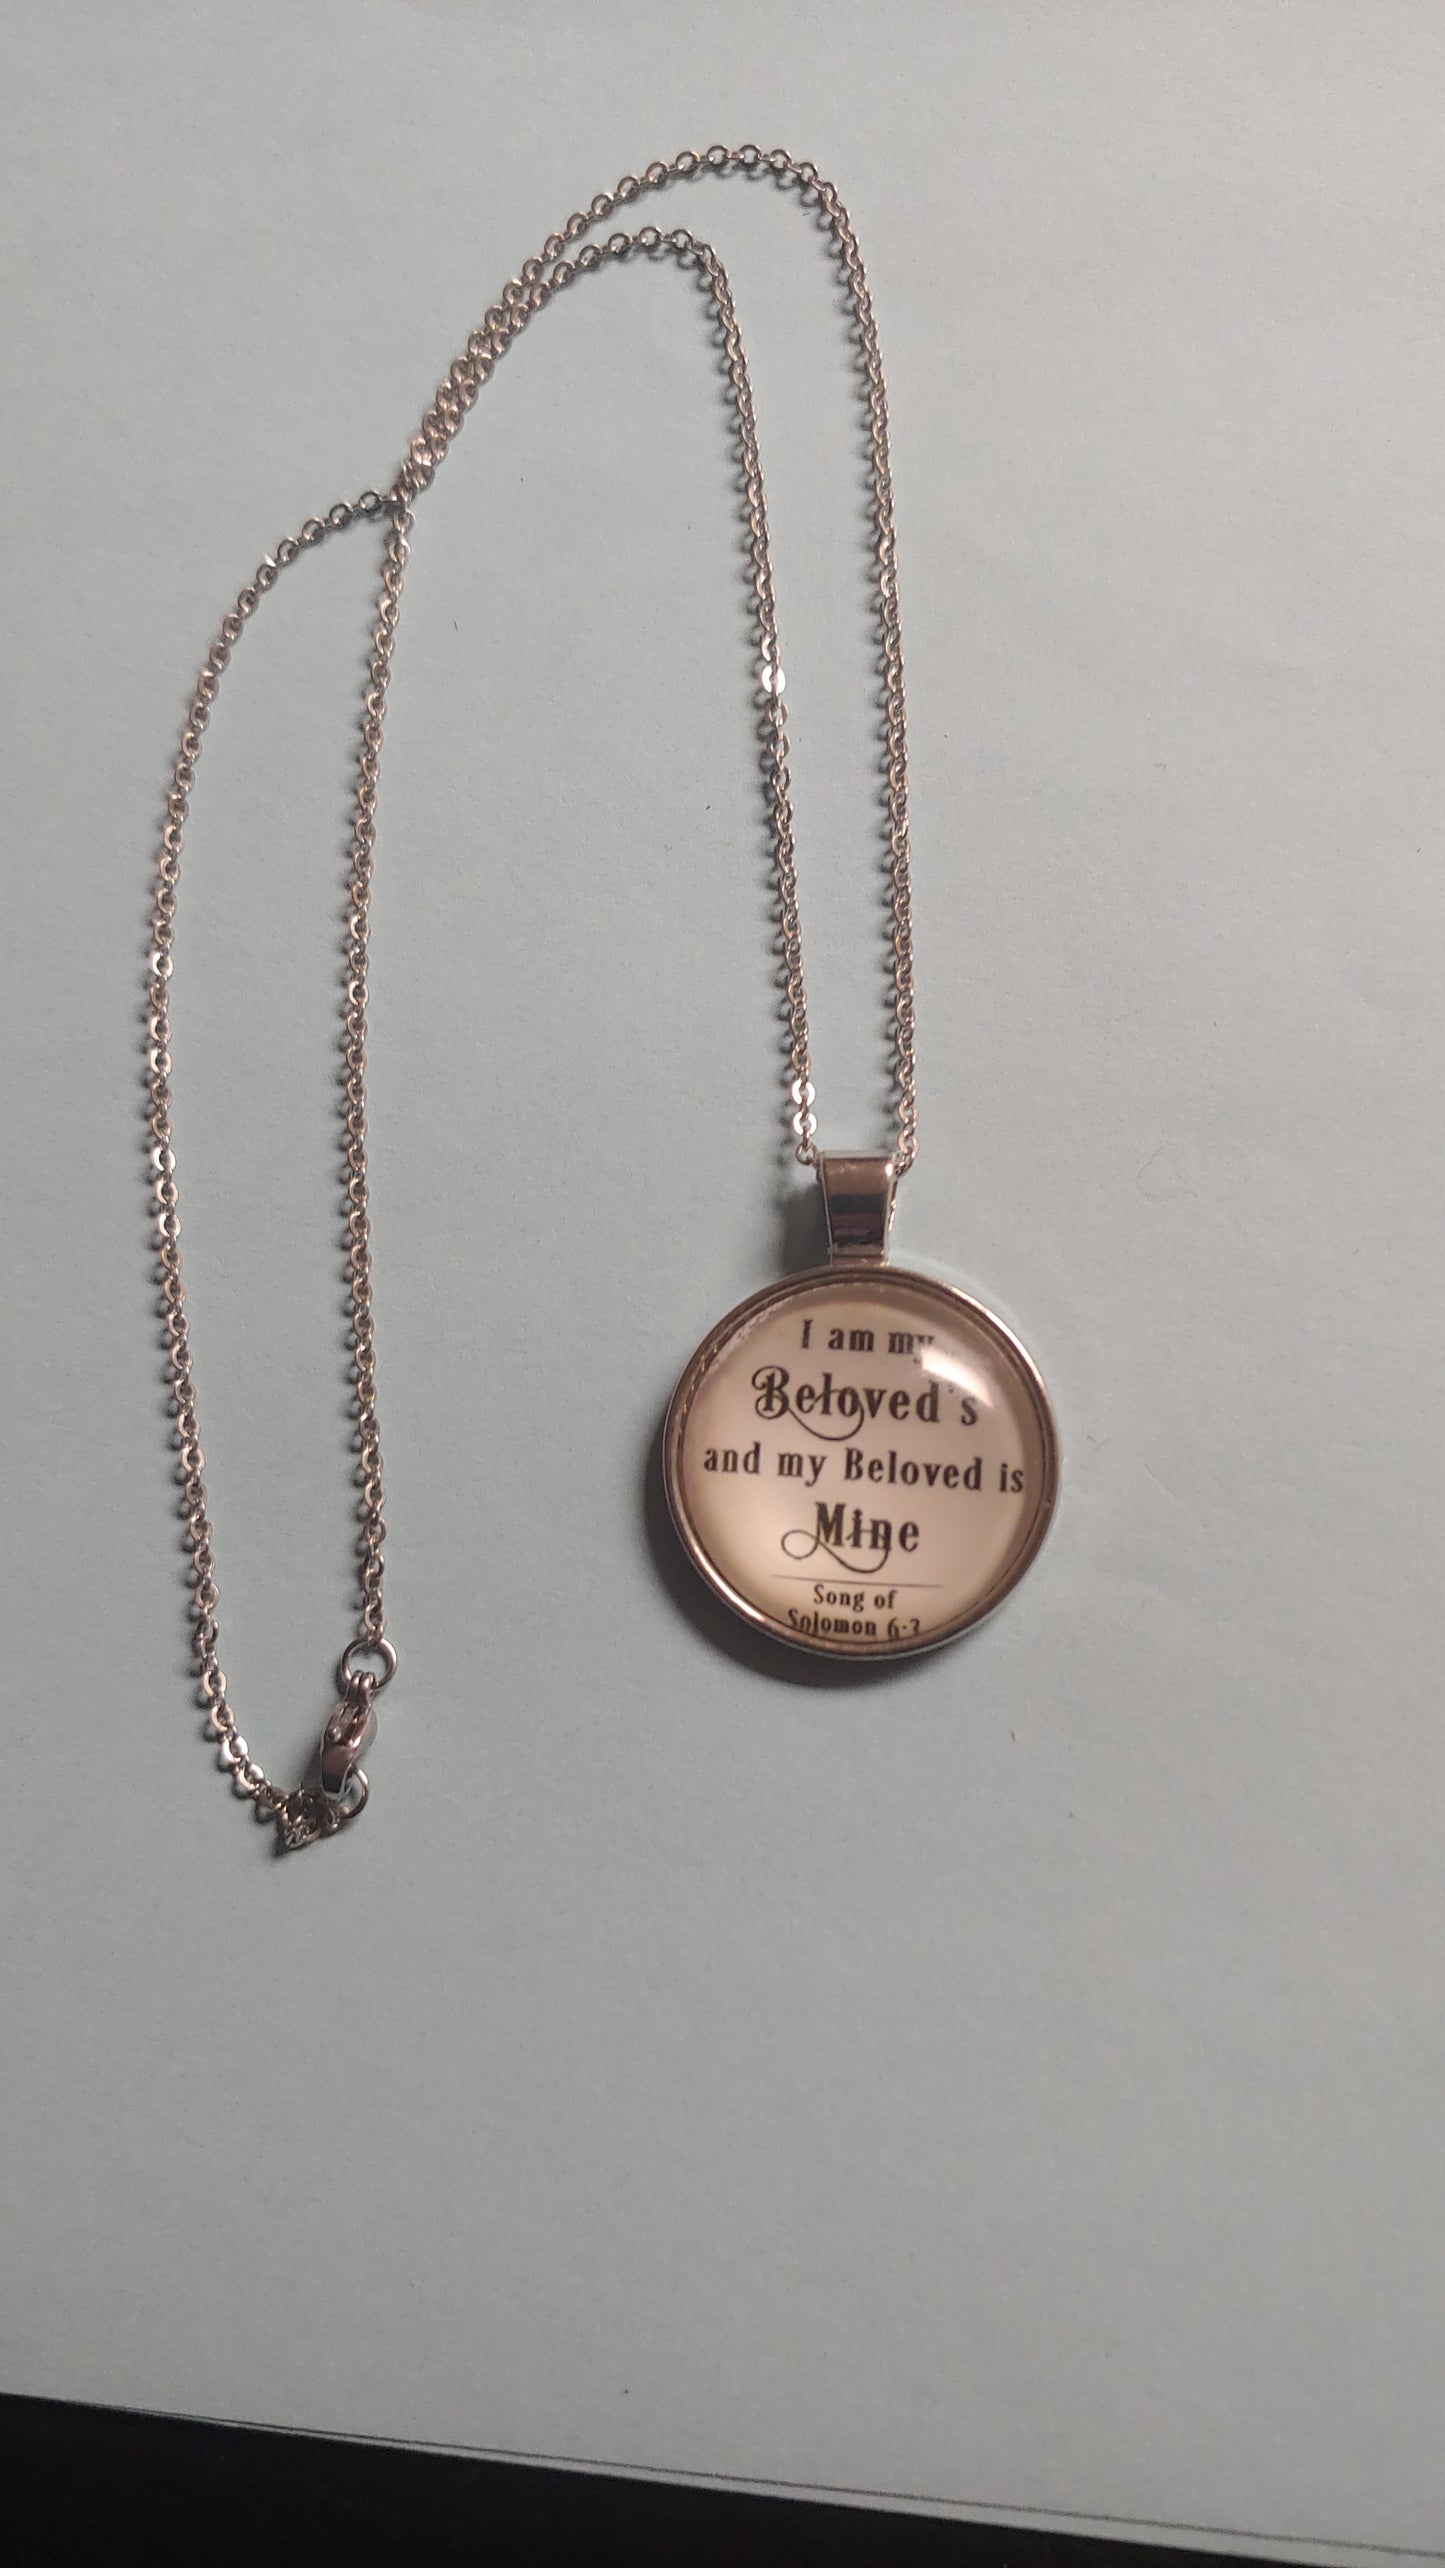 I am my beloved's - Circle necklace